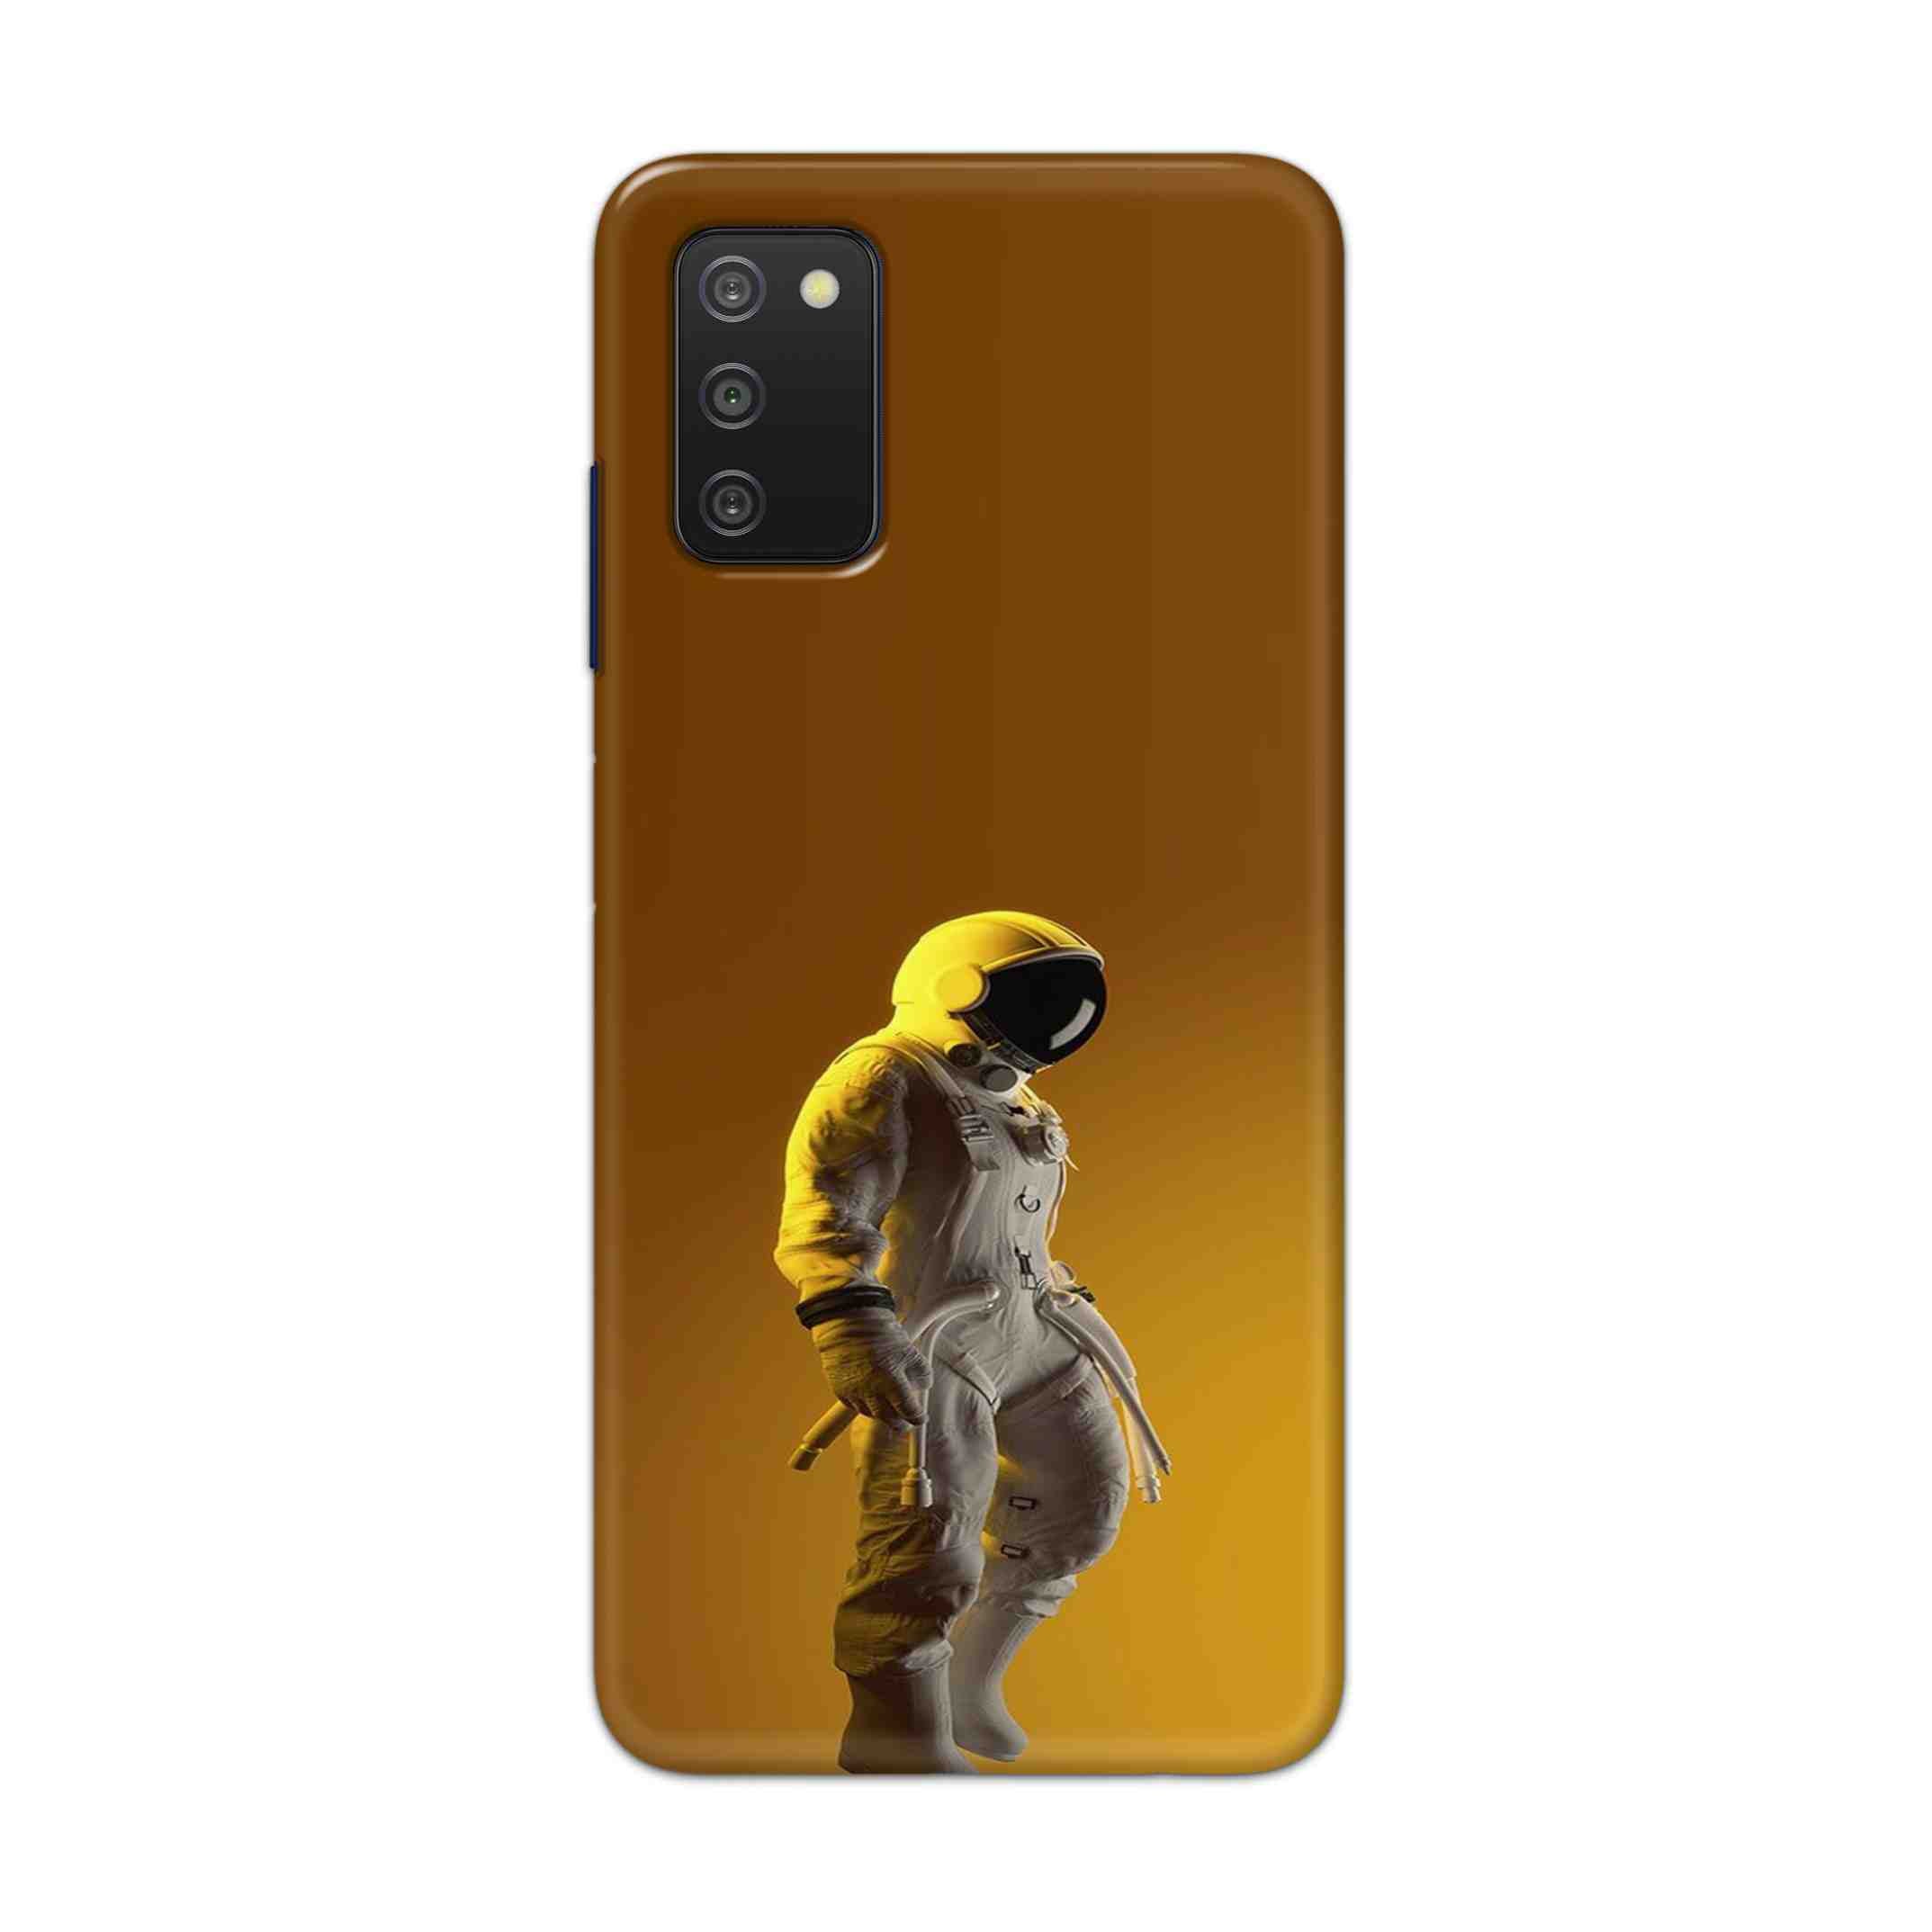 Buy Yellow Astronaut Hard Back Mobile Phone Case Cover For Samsung A03s Online